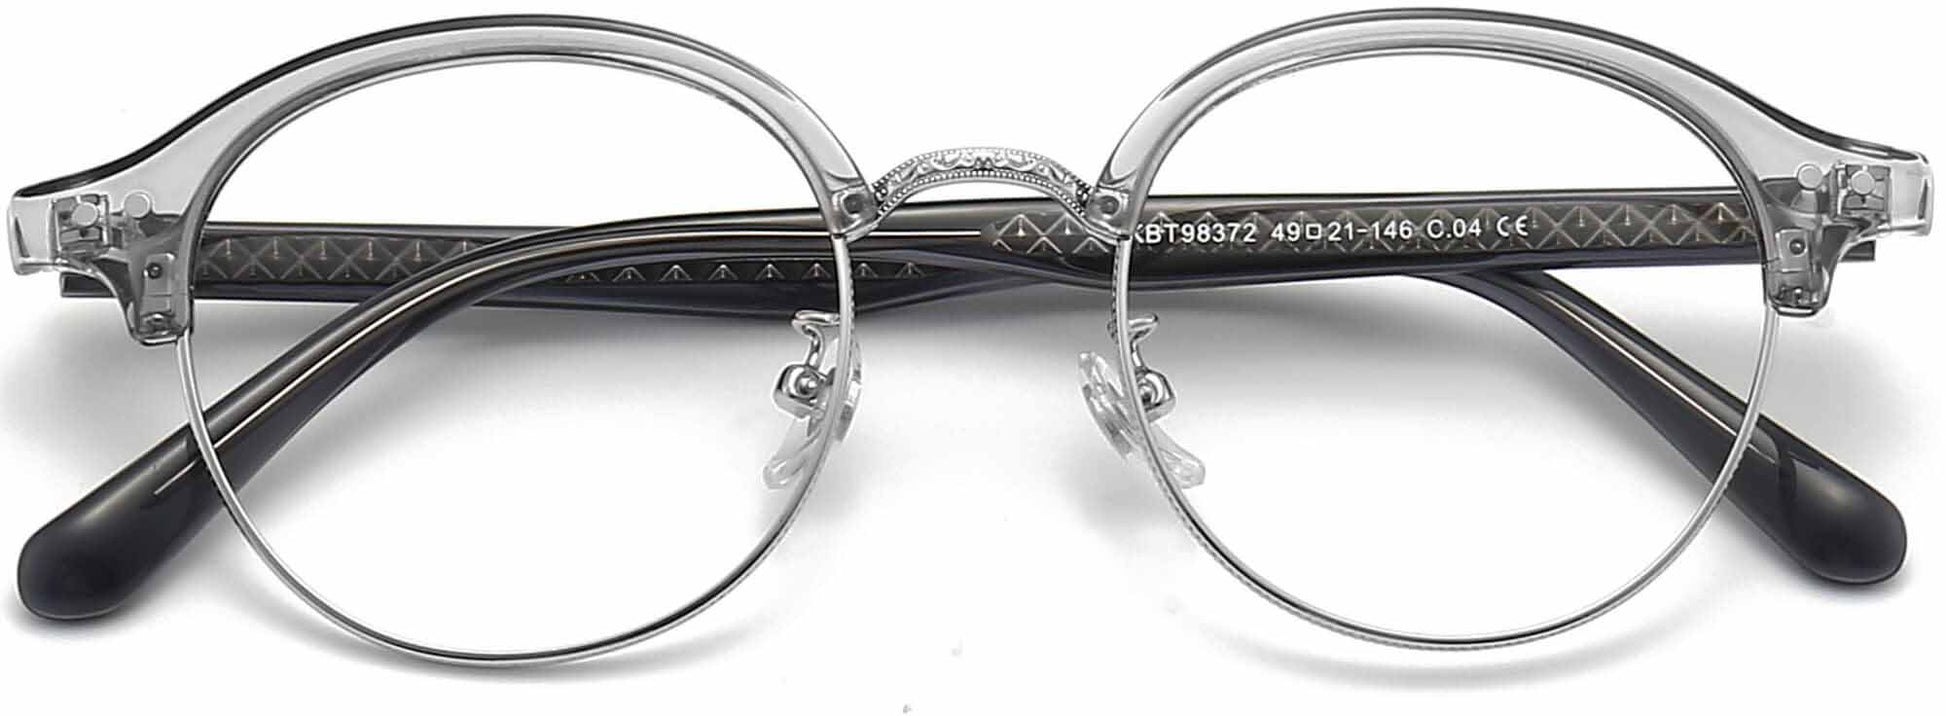 Grant Browline Gray Eyeglasses from ANRRI, closed view